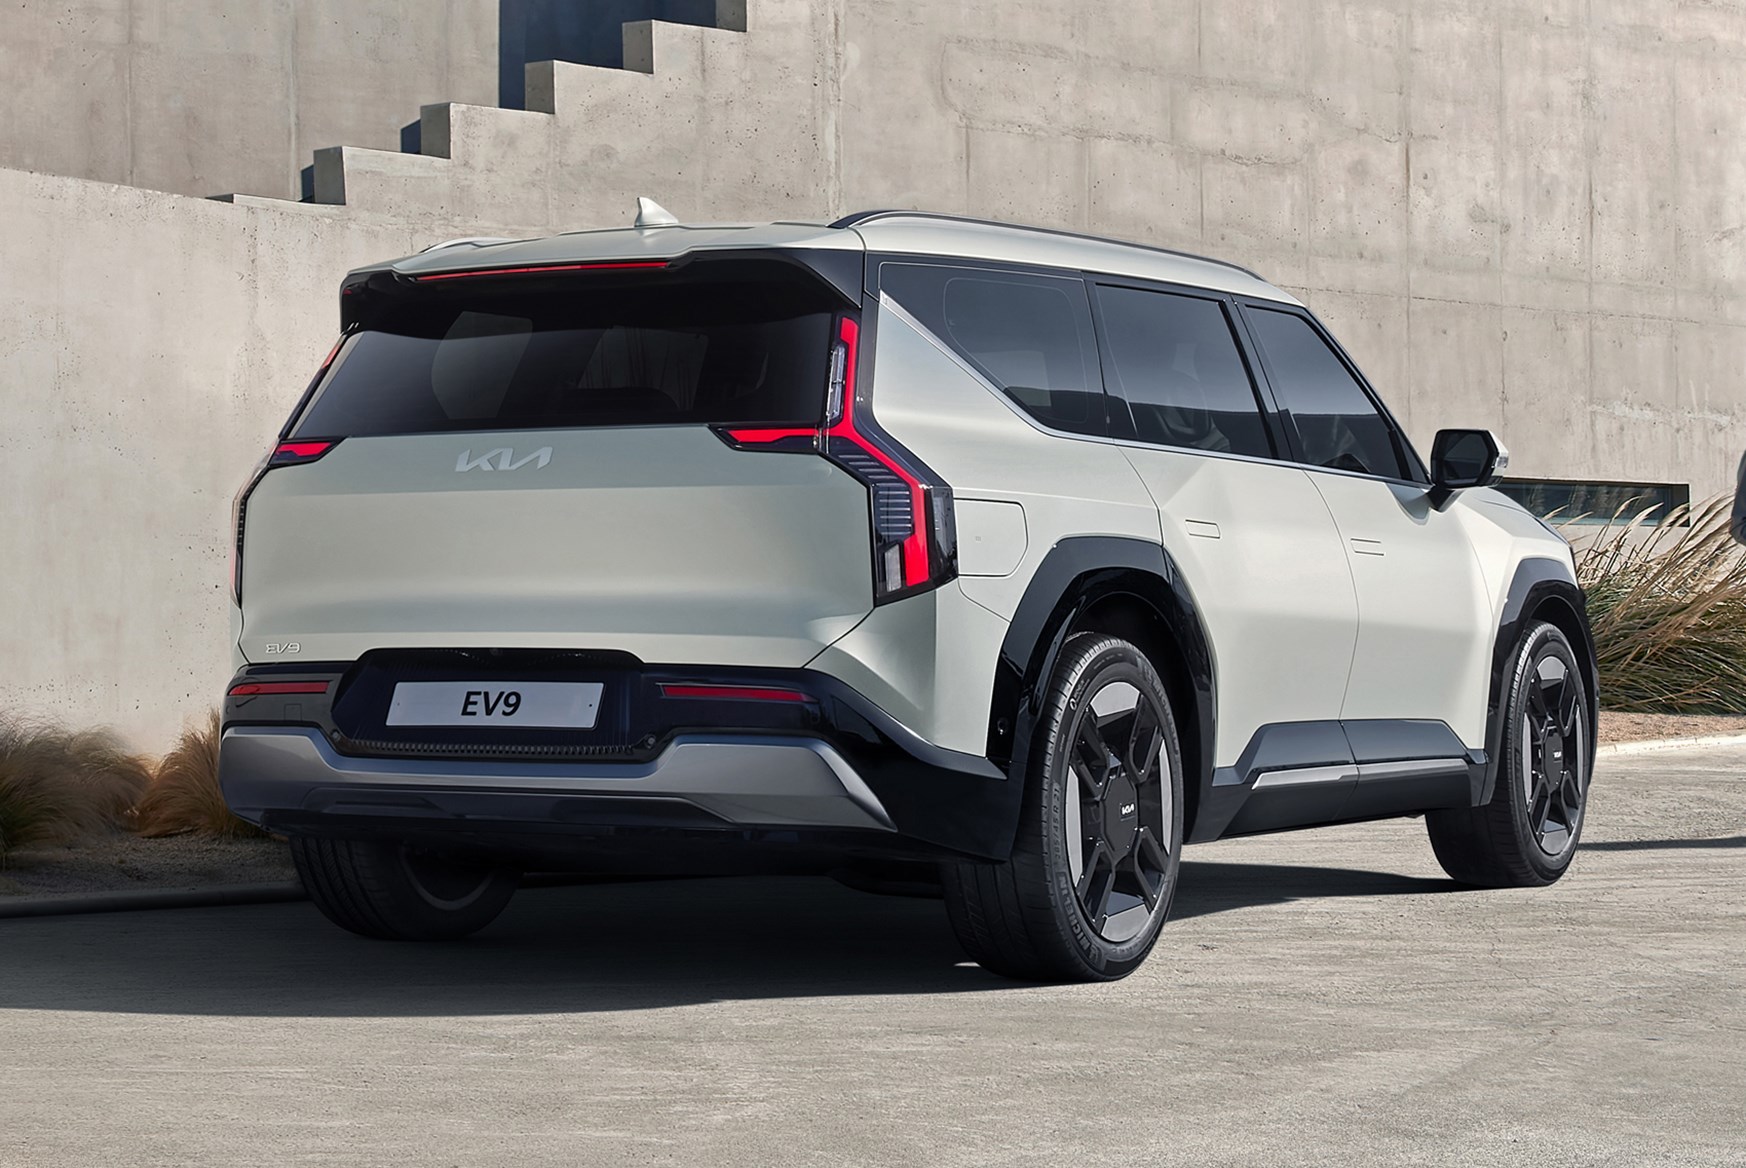 Kia's bold electric SUV that will seat seven: Seats swivel and recline so occupants can relax and chat while charging en route